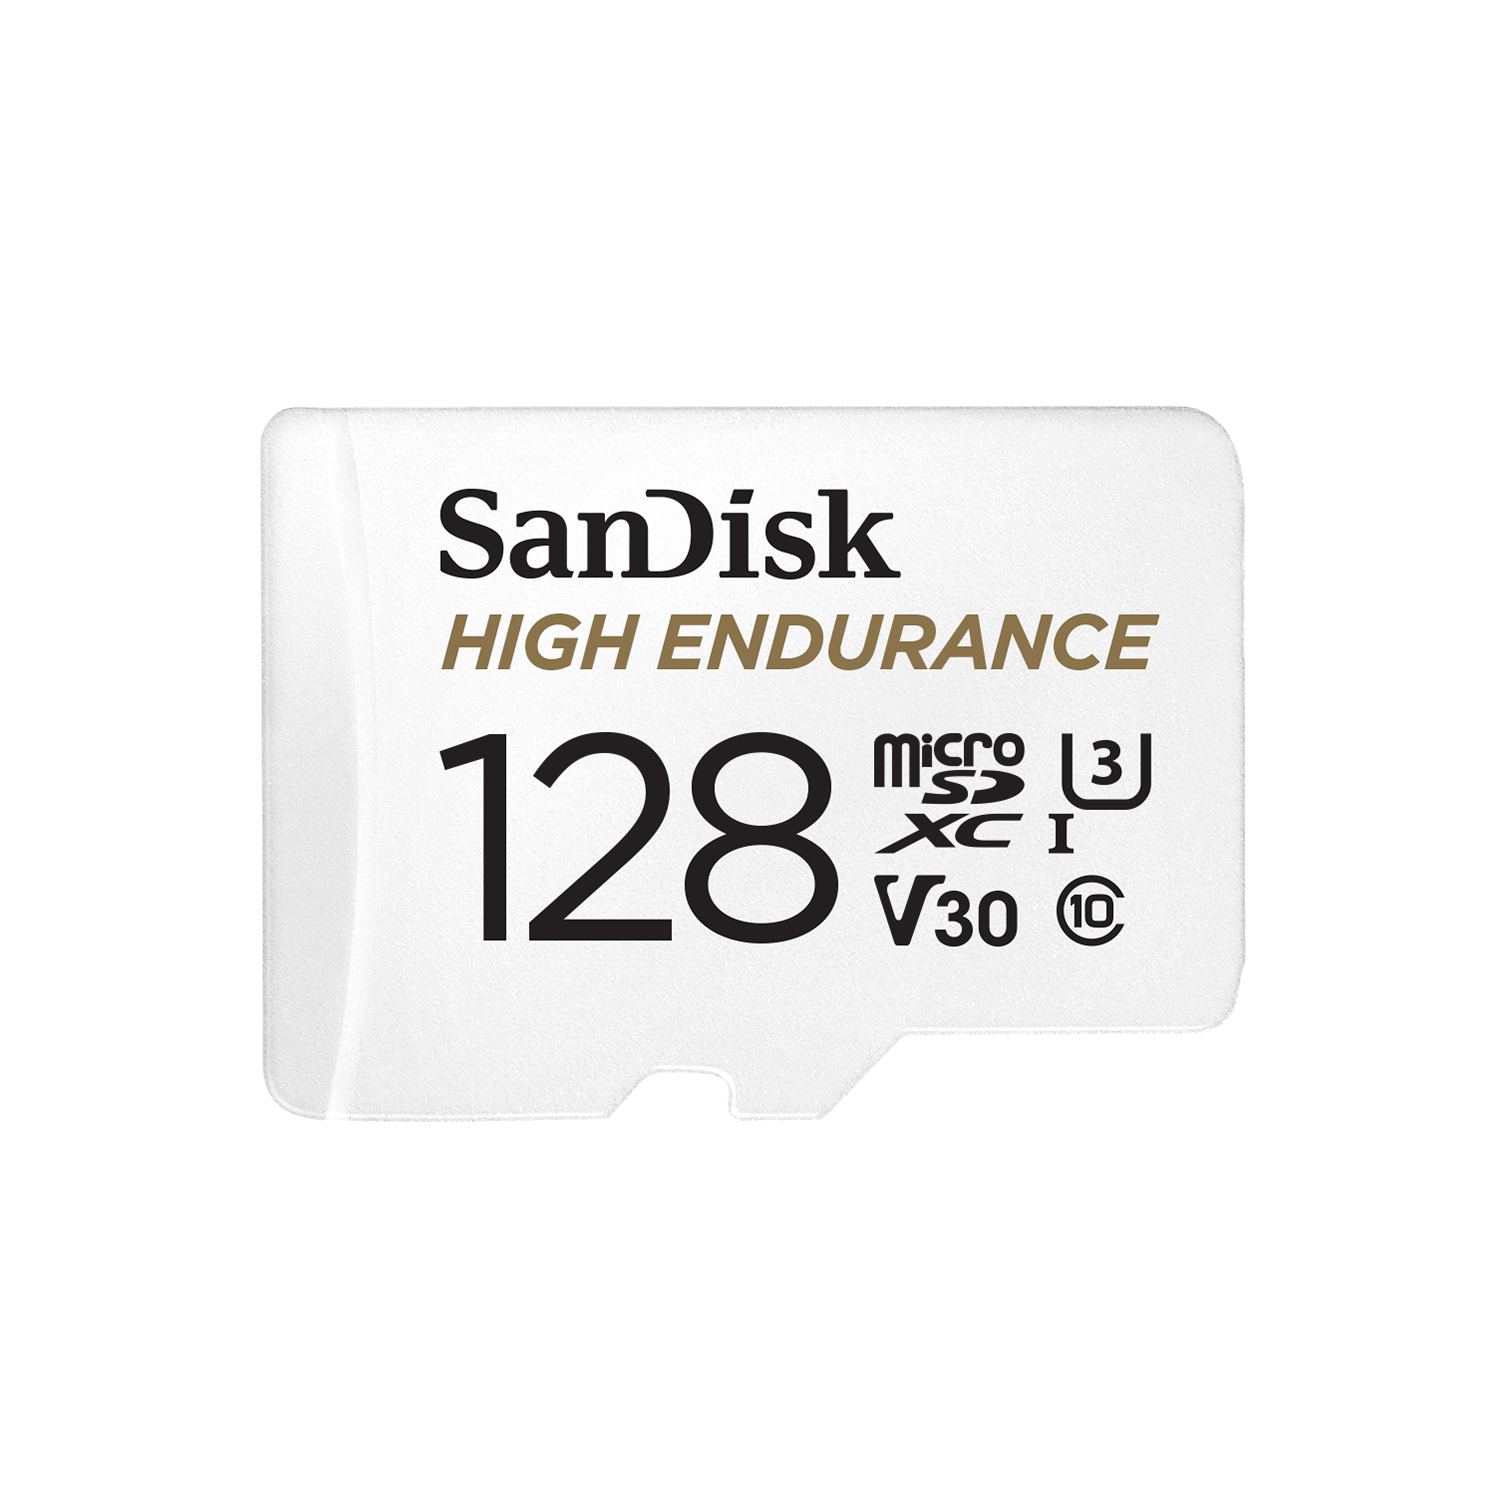 SanDisk 128GB High Endurance Micro SD Card with Adapter SDSQQNR-128G for Dash Cam and Video Monitoring System